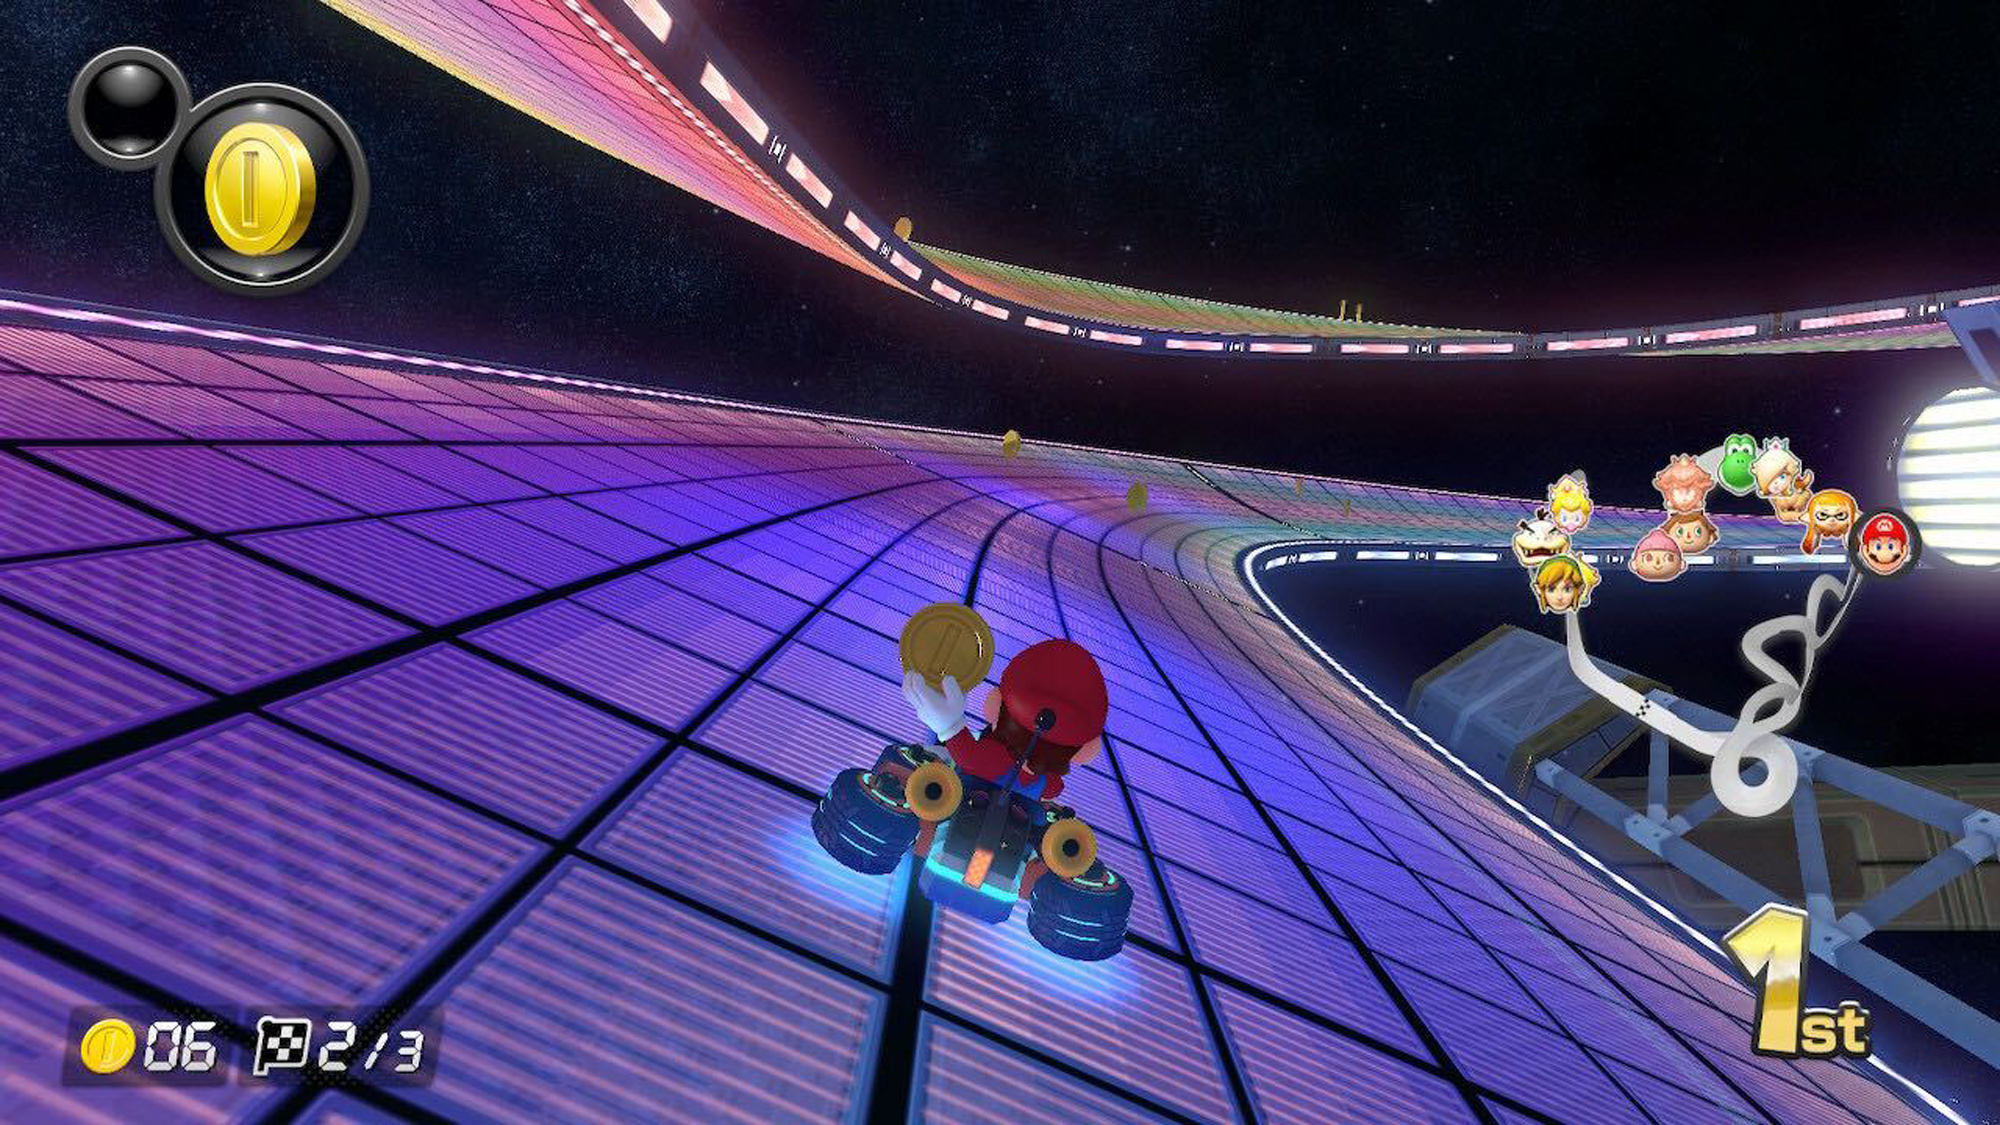 Could Mario Kart Teach Us How to Reduce World Poverty and Improve Sustainability? The Brink Boston University